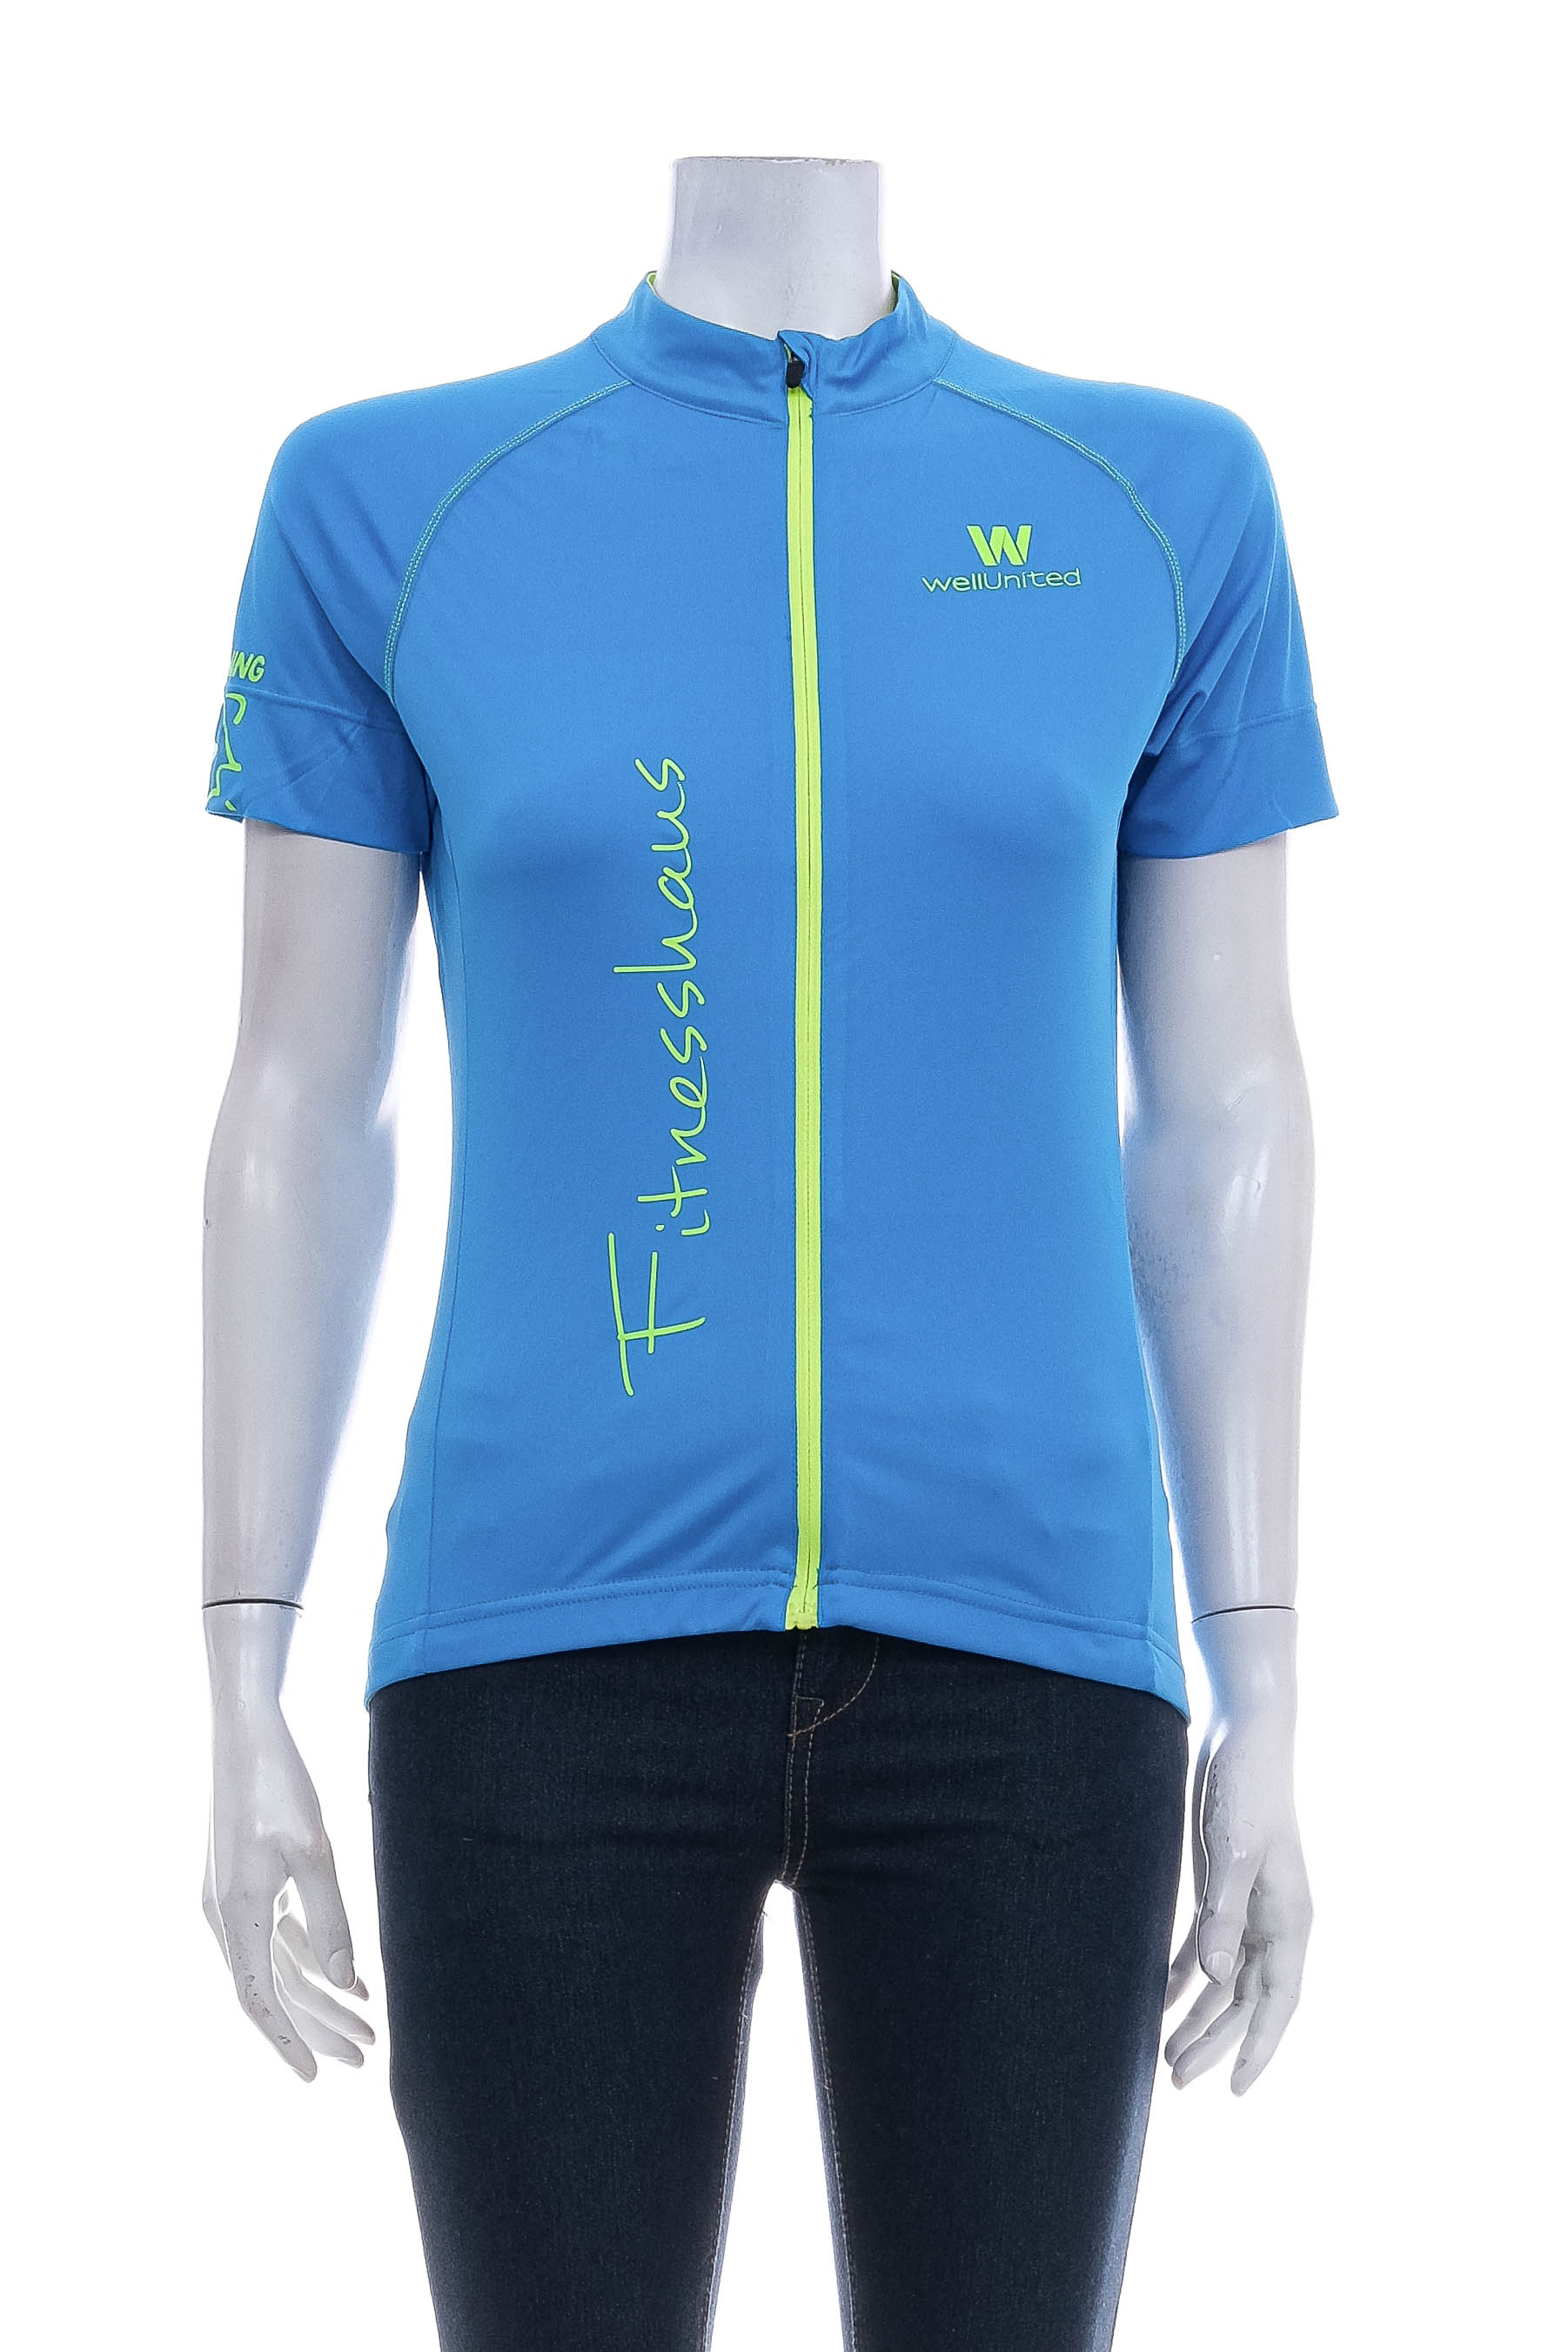 Female sports top for cycling - James & Nicholson - 0